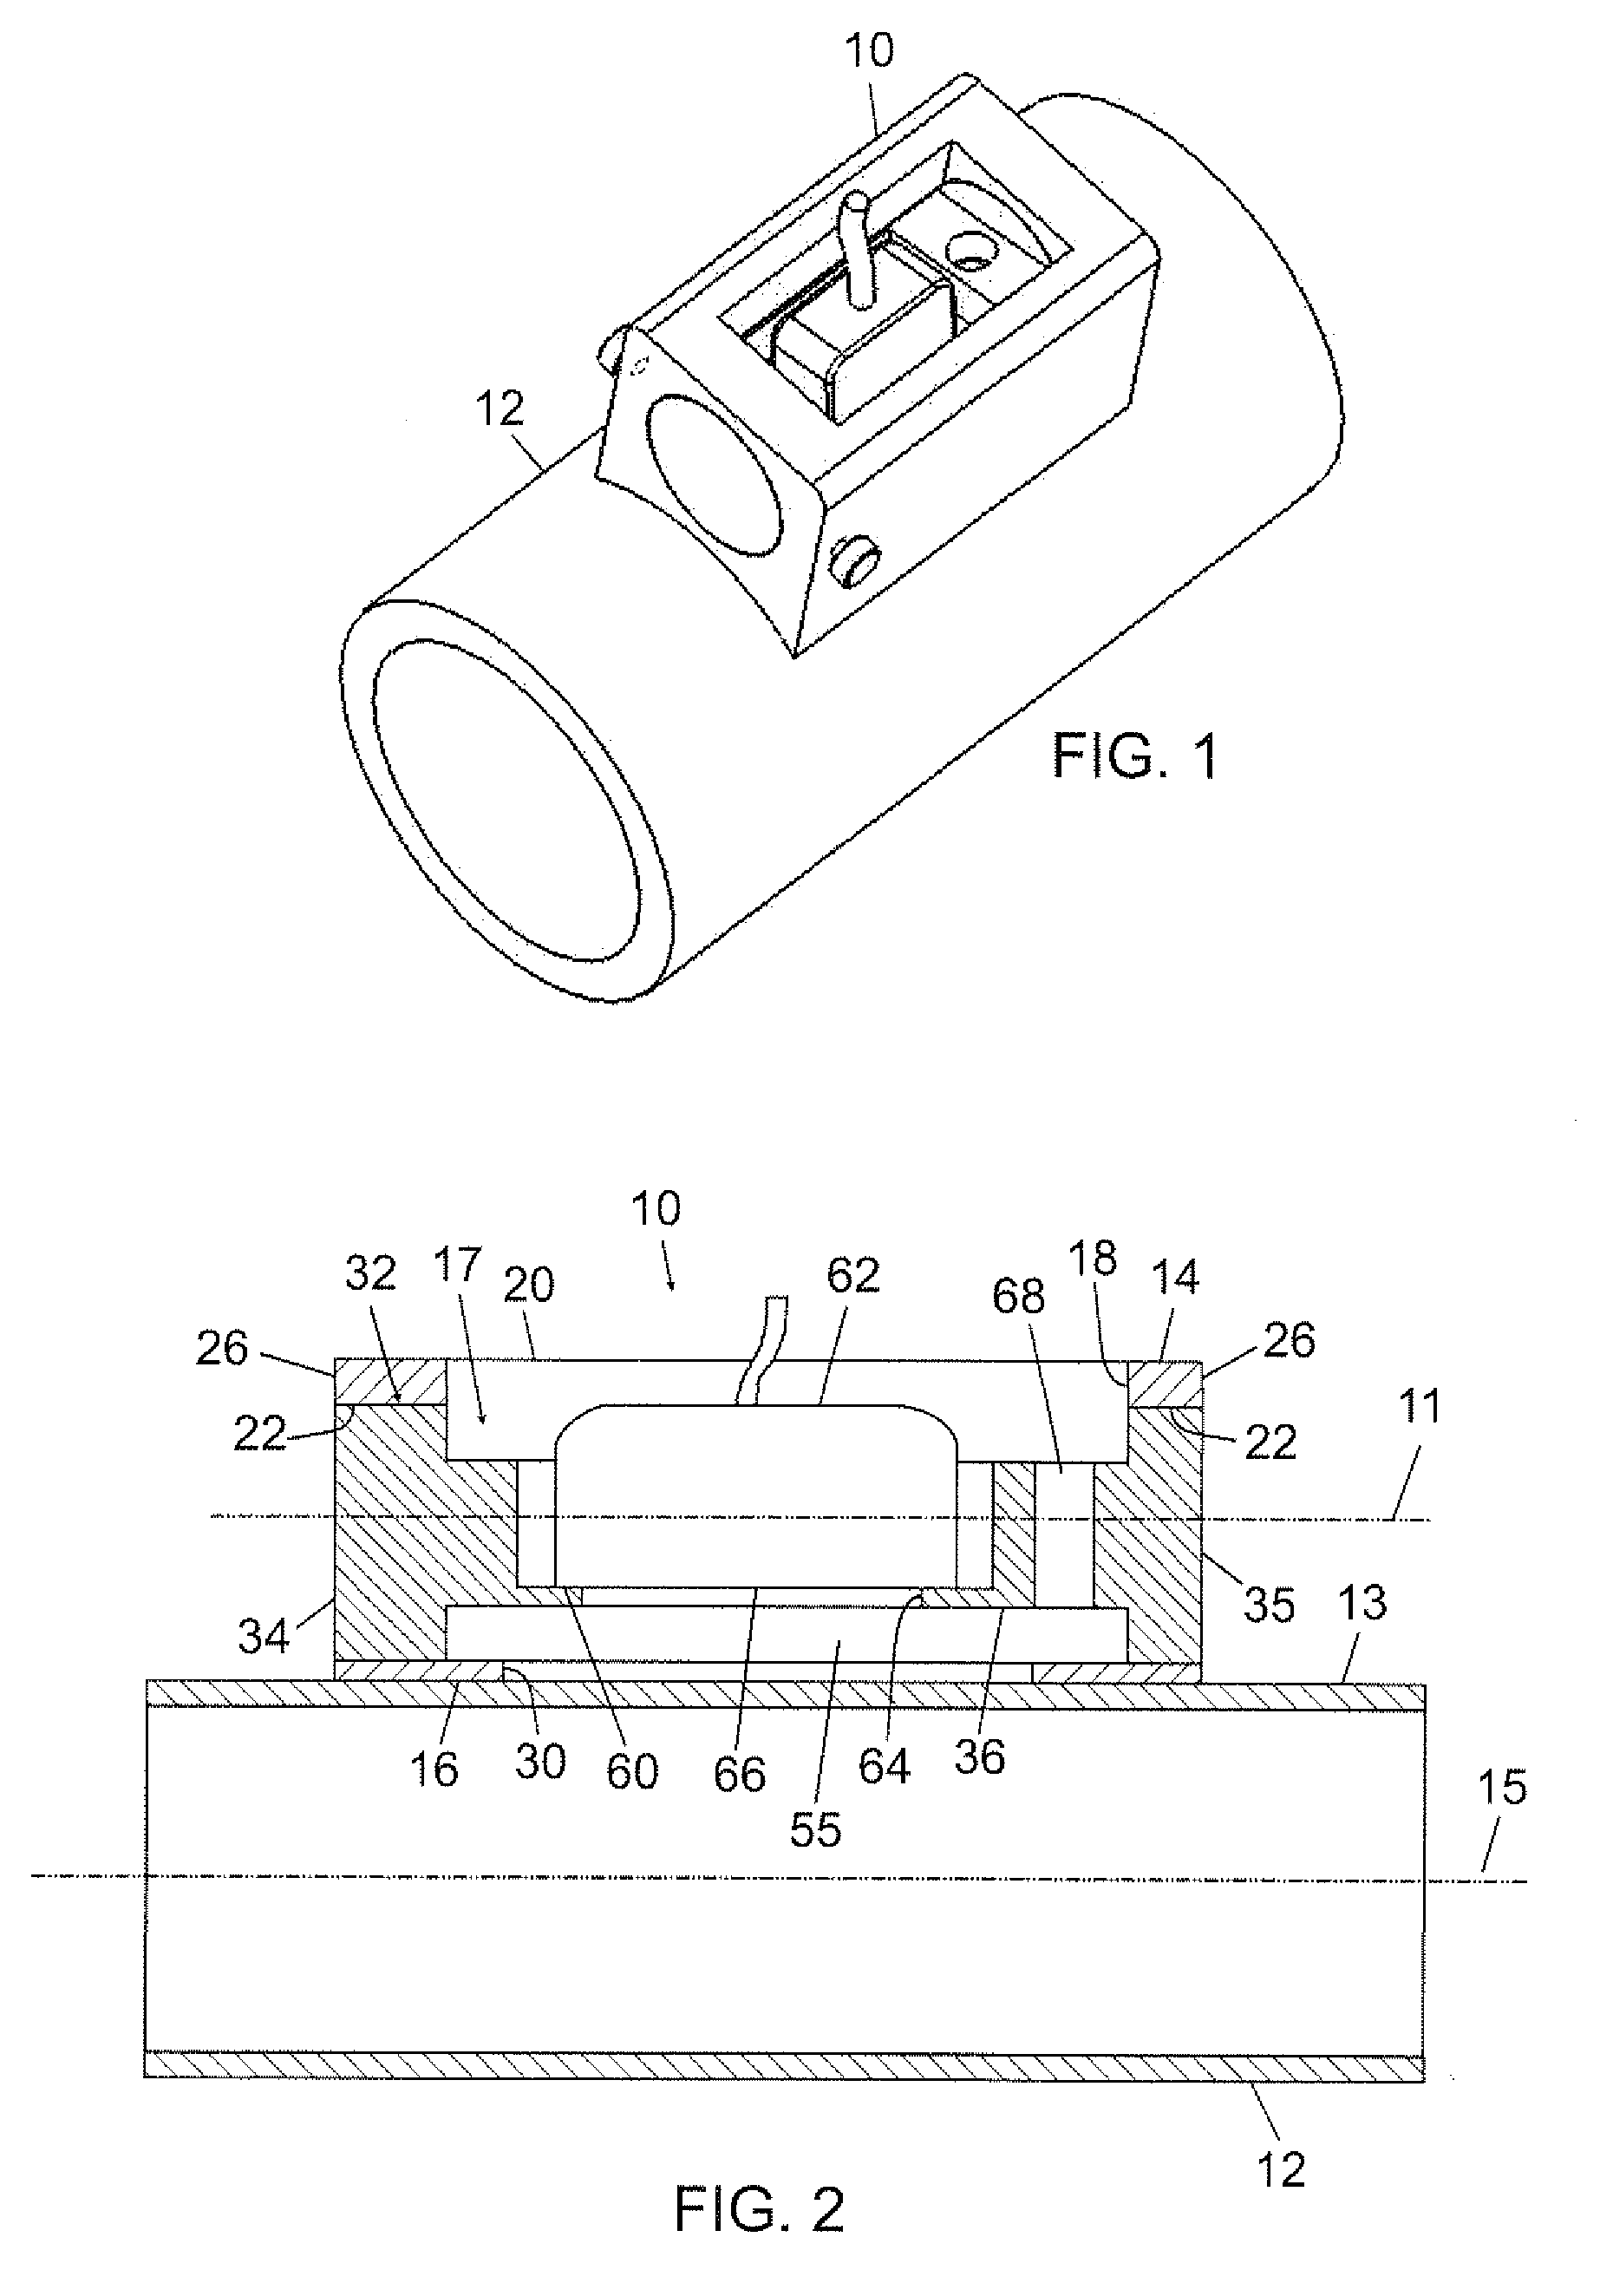 Membrane-Coupled Ultrasonic Probe System for Detecting Flaws in a Tubular